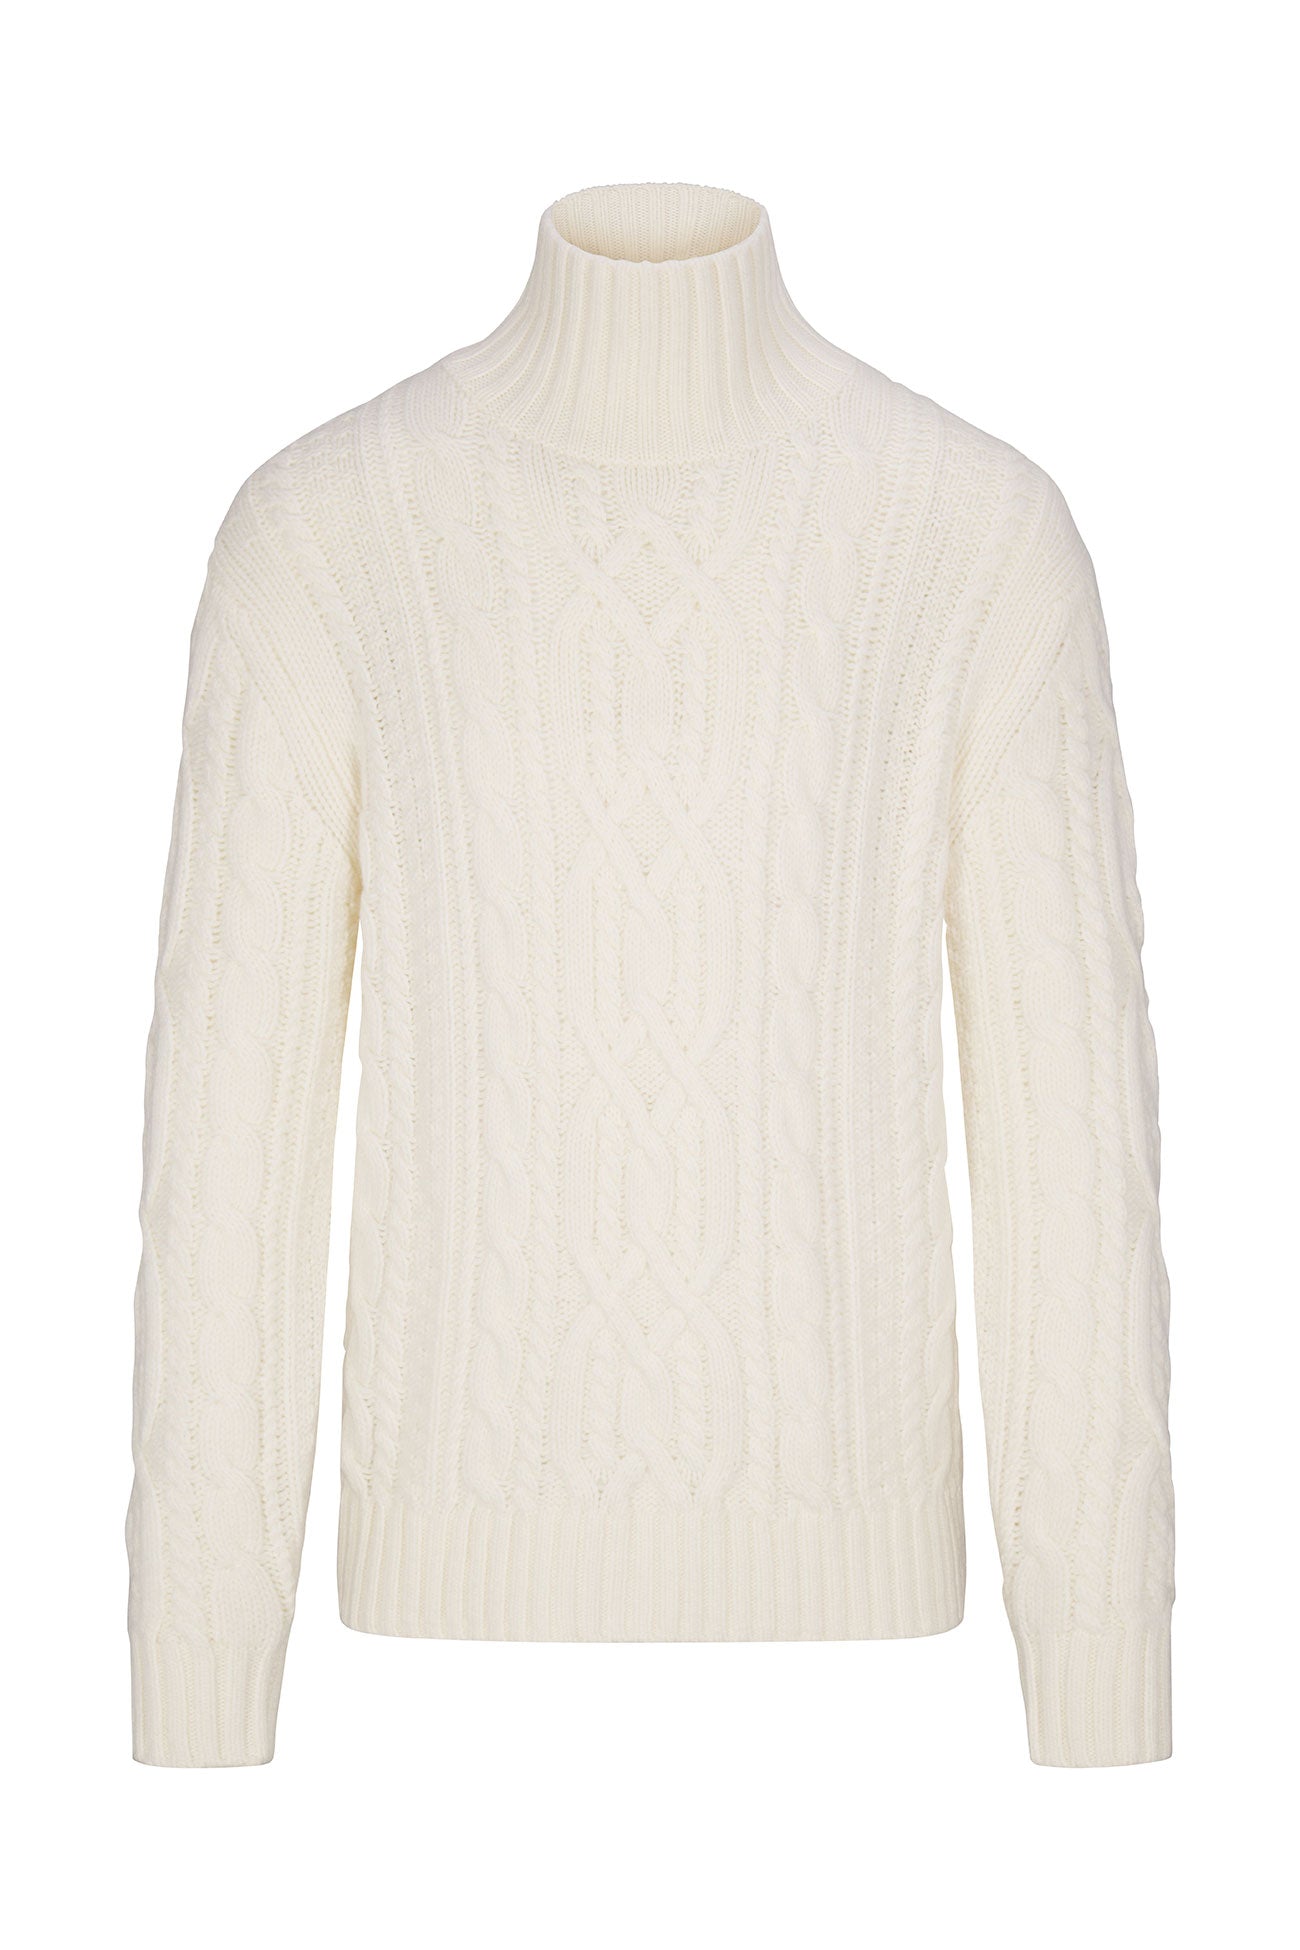 Cashmere Cable Knit Turtleneck Sweater